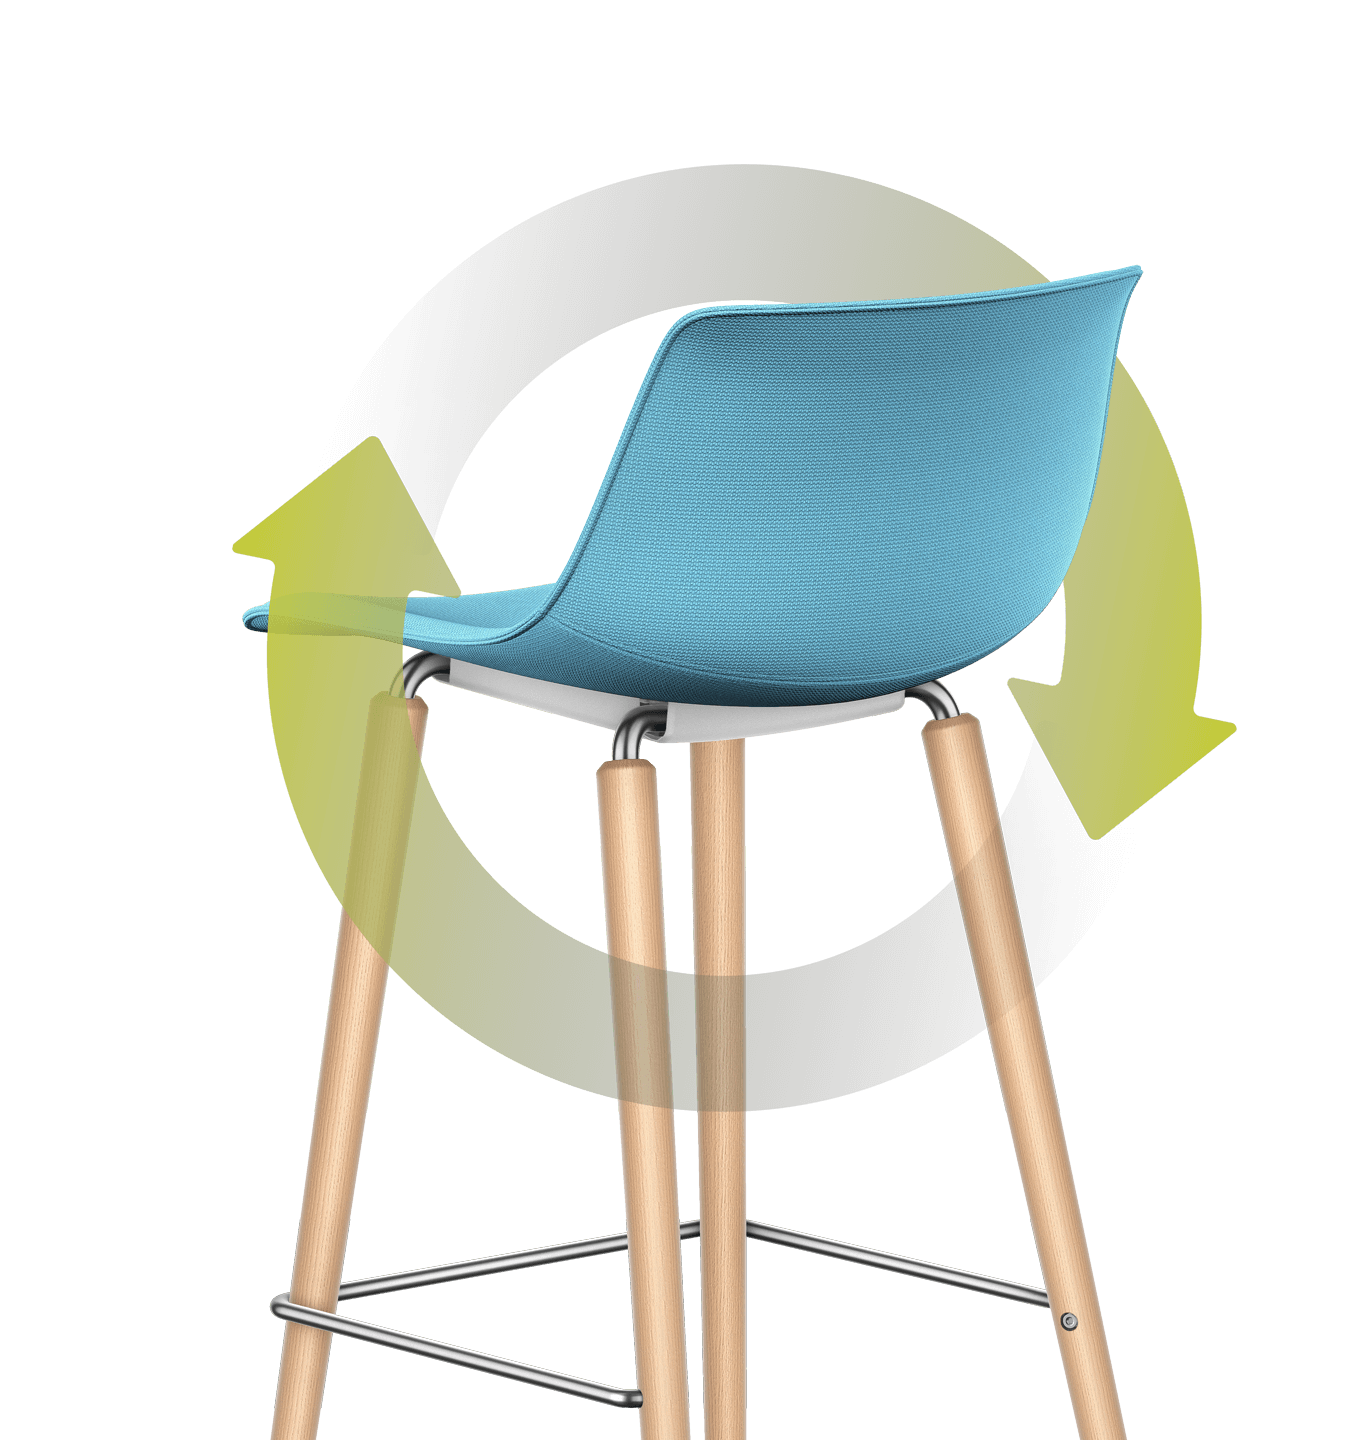 An illustration of green leaves loops around the bar chair with a padded seat and backrest and four-legged wooden base frame. The stem loops around the chair in a circular motion, with the leaves leaning against the rear of the padded backrest.